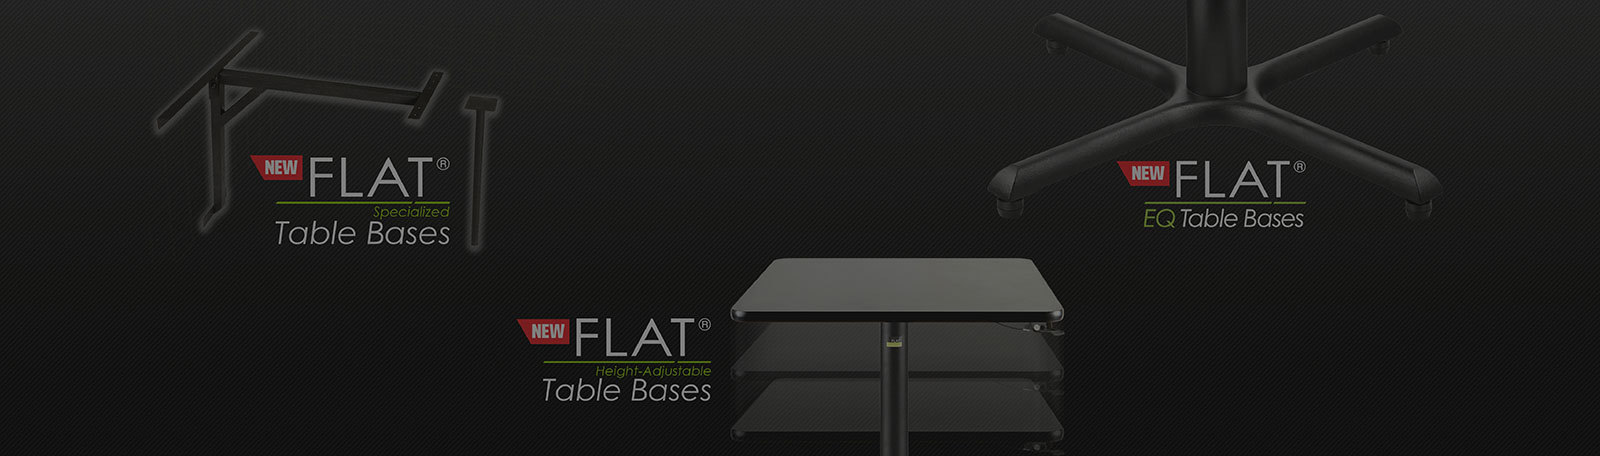 FLAT Launch New Product Lines Increasing Flexibility for Operators